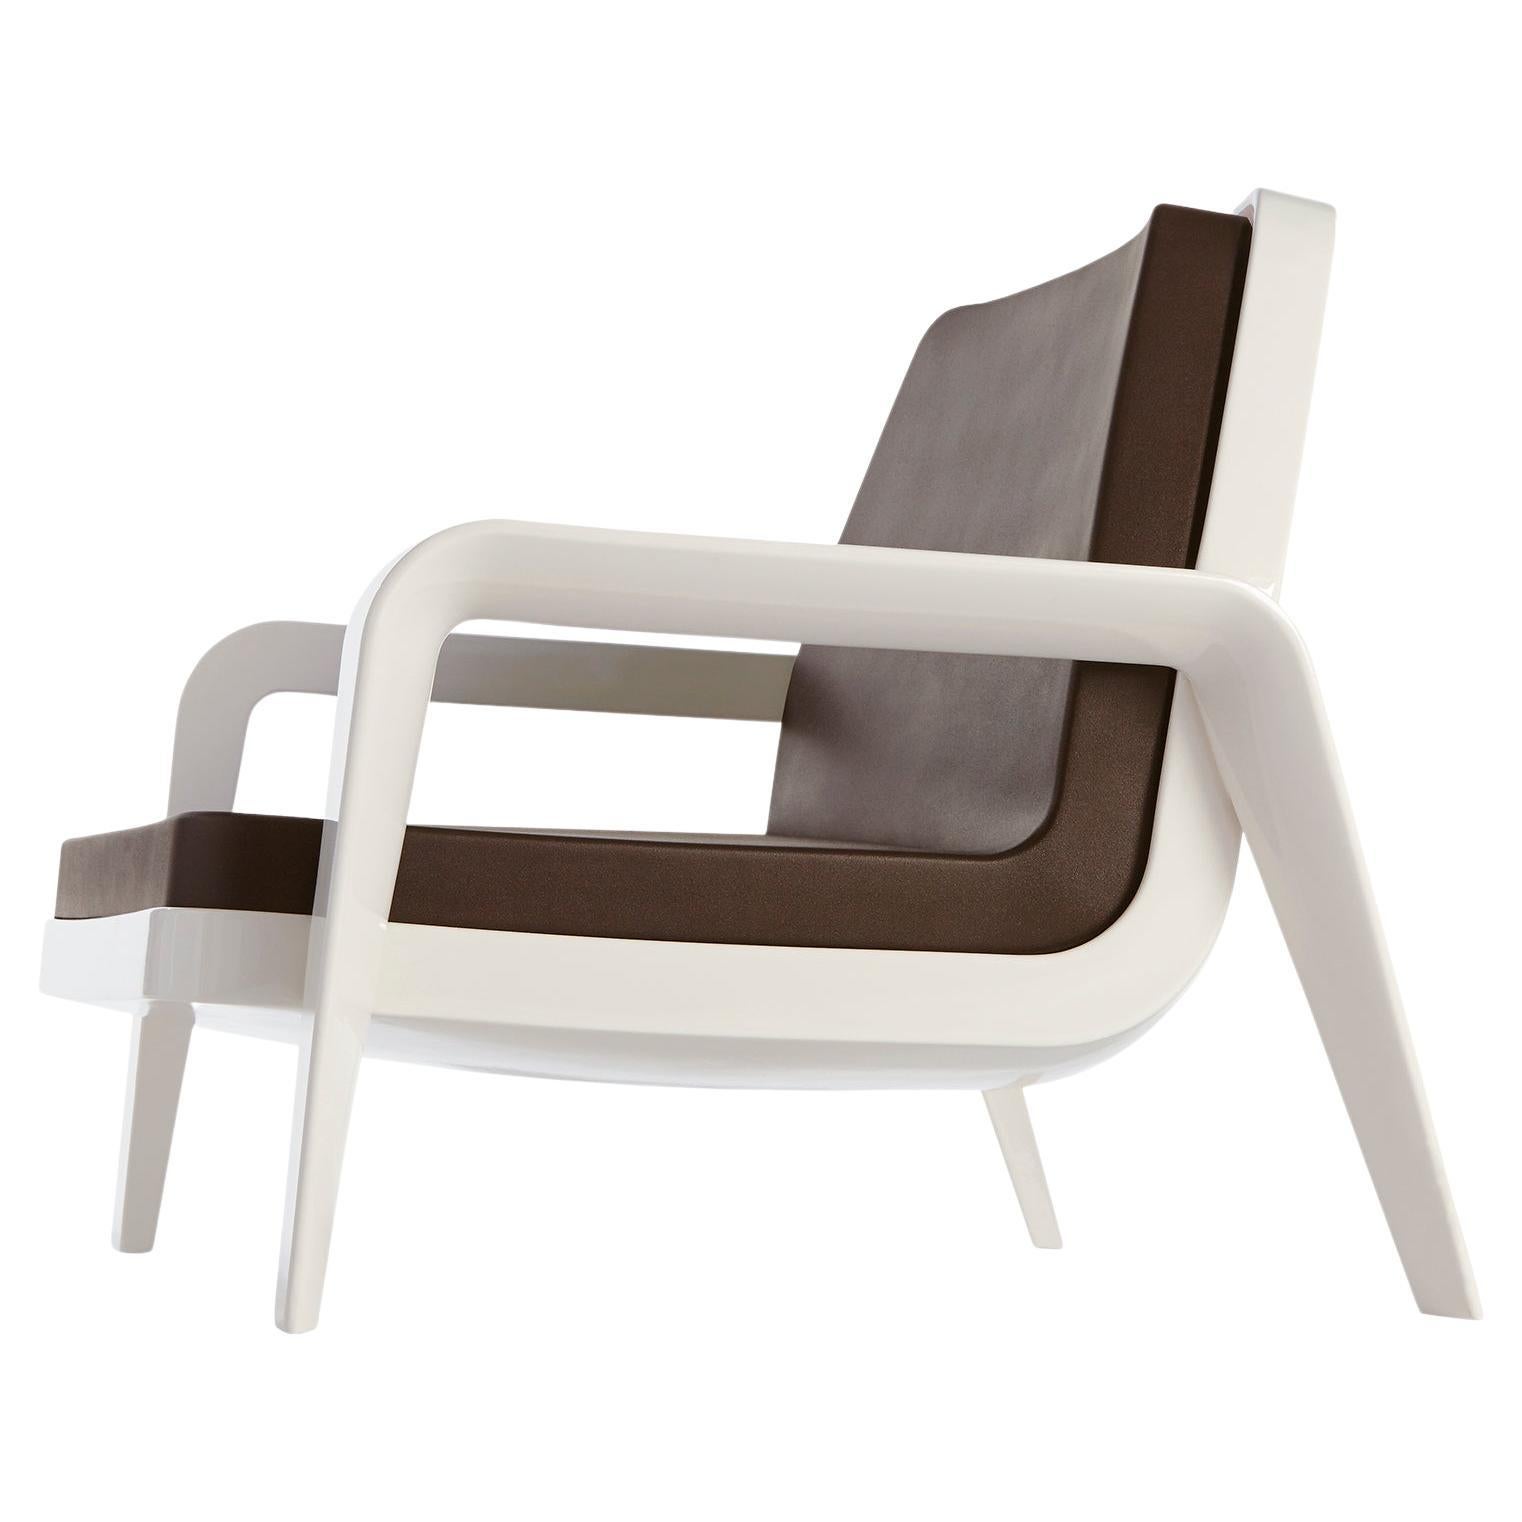 Slide Design America Armchair in Soft Chocolate Fabric with Milky White Frame